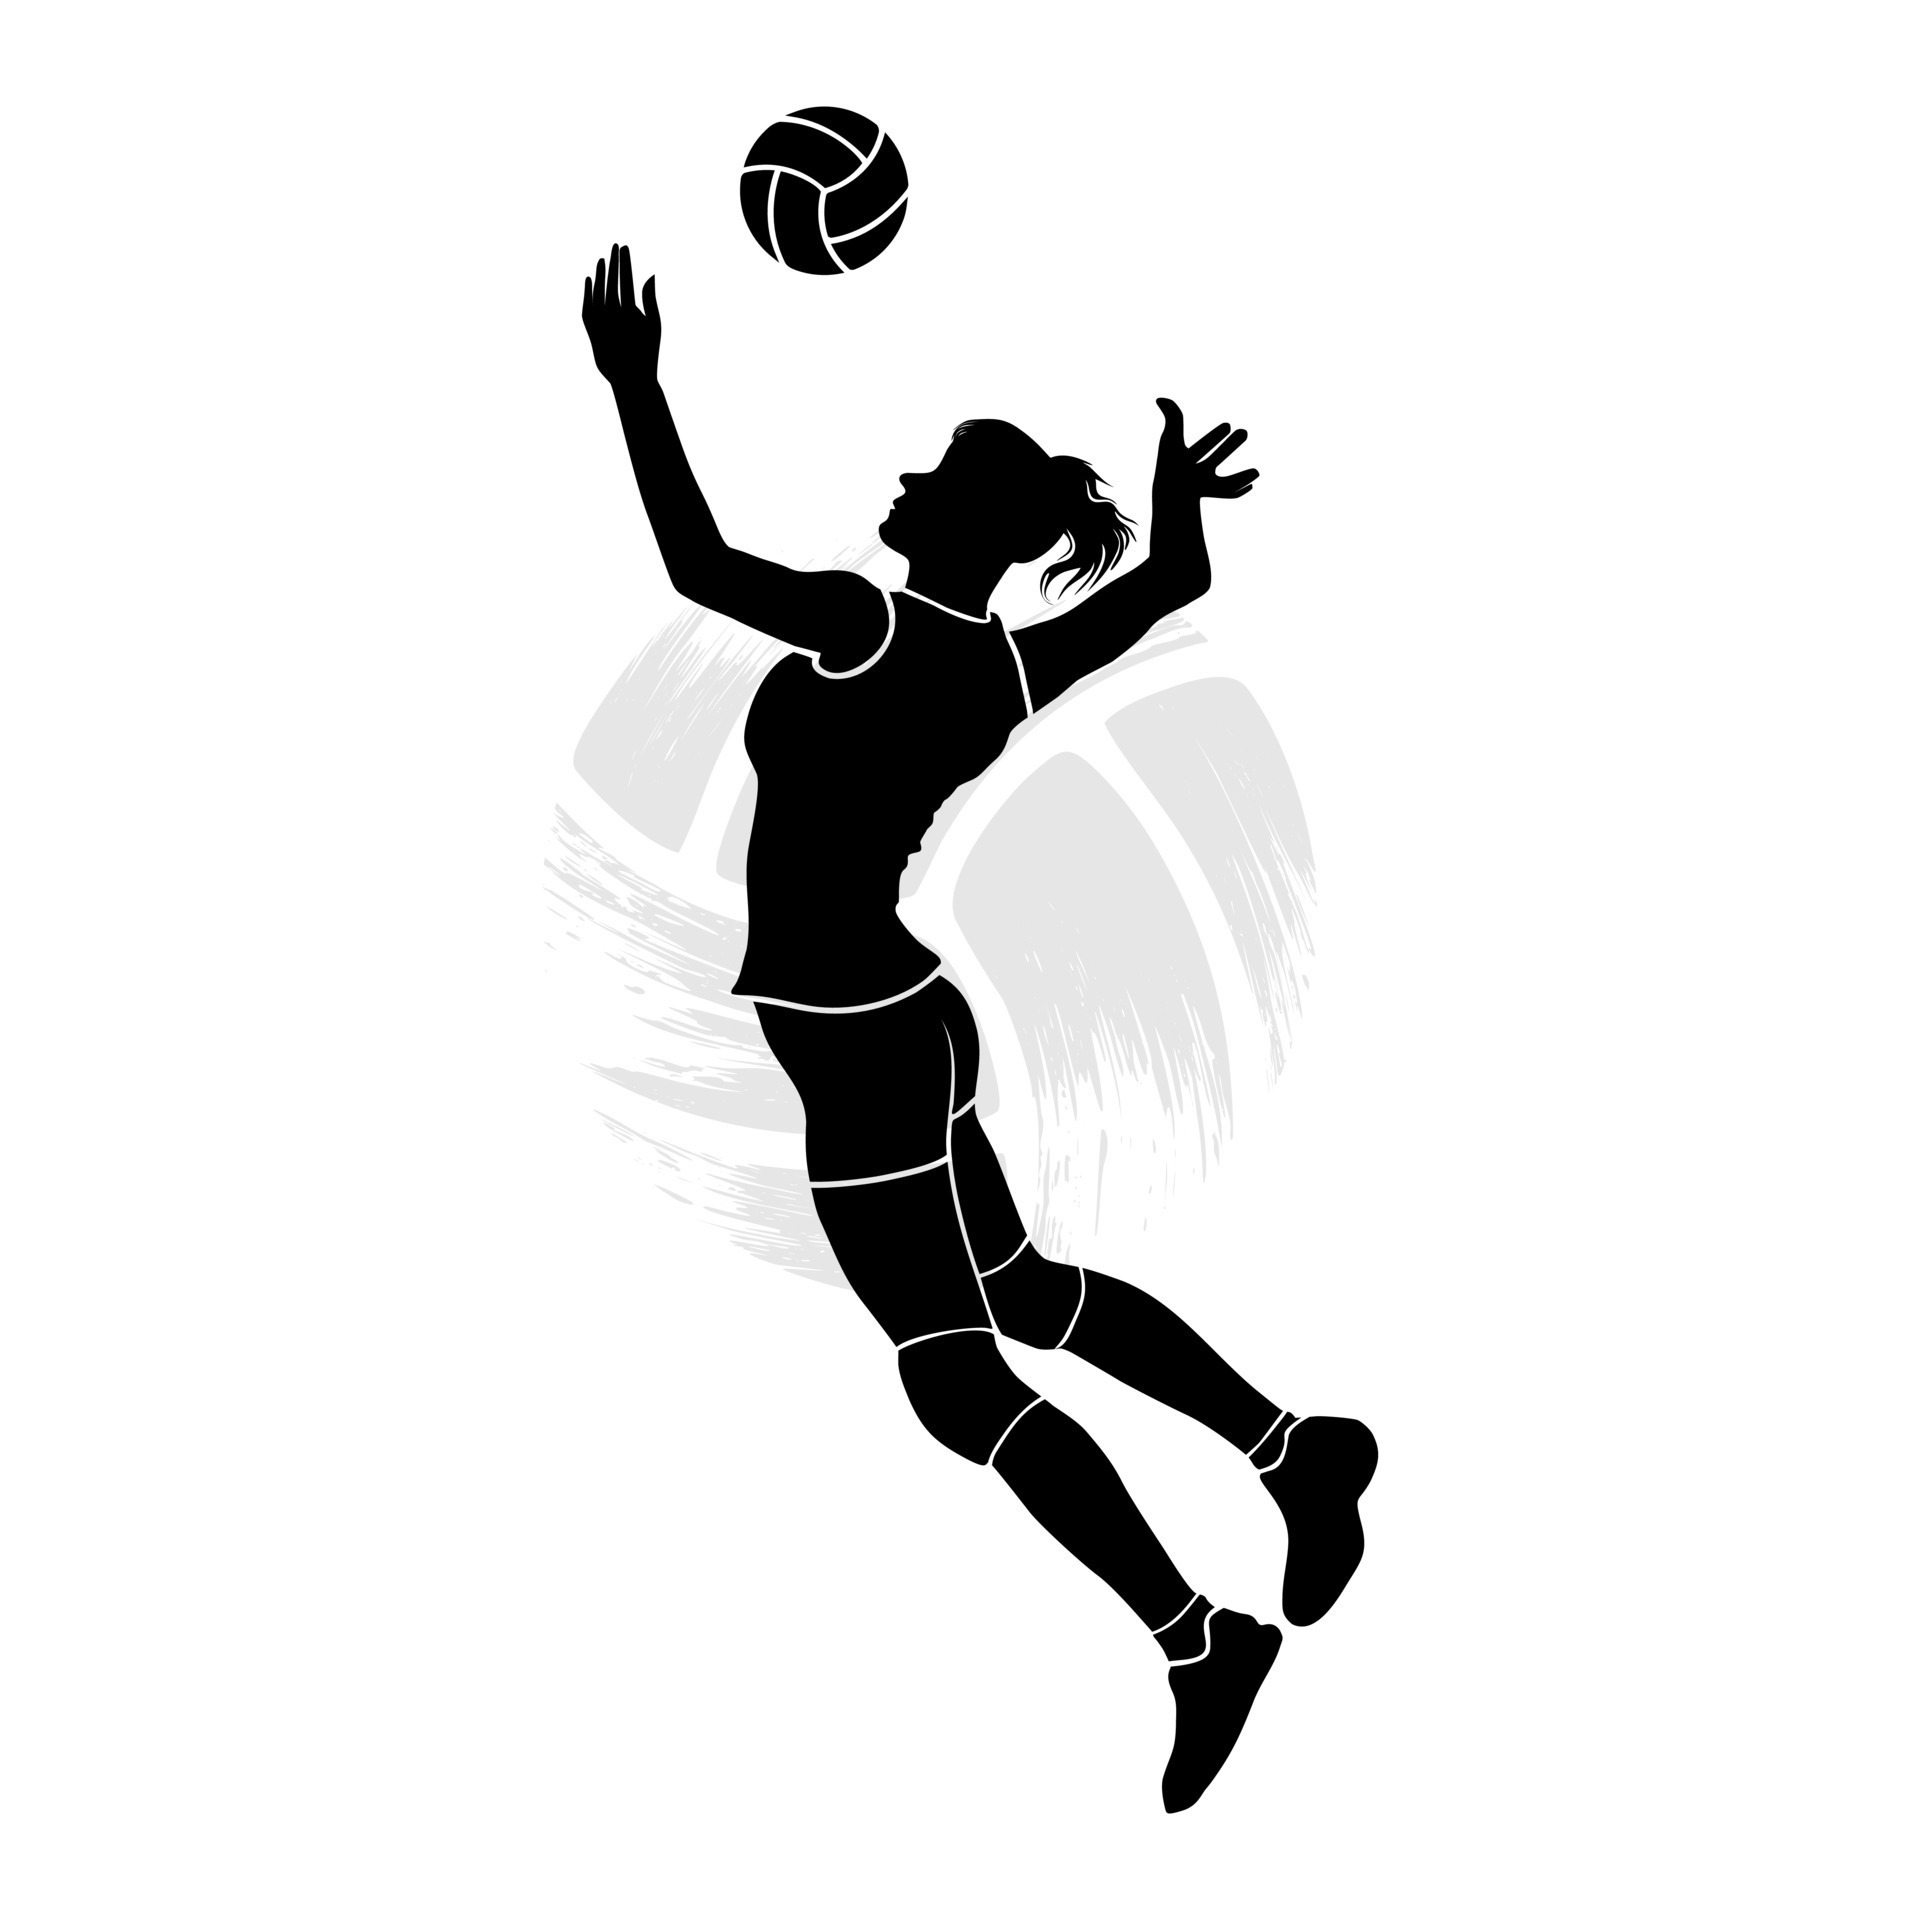 Female volleyball player jumps to hit the ball. Silhouette illustration ...